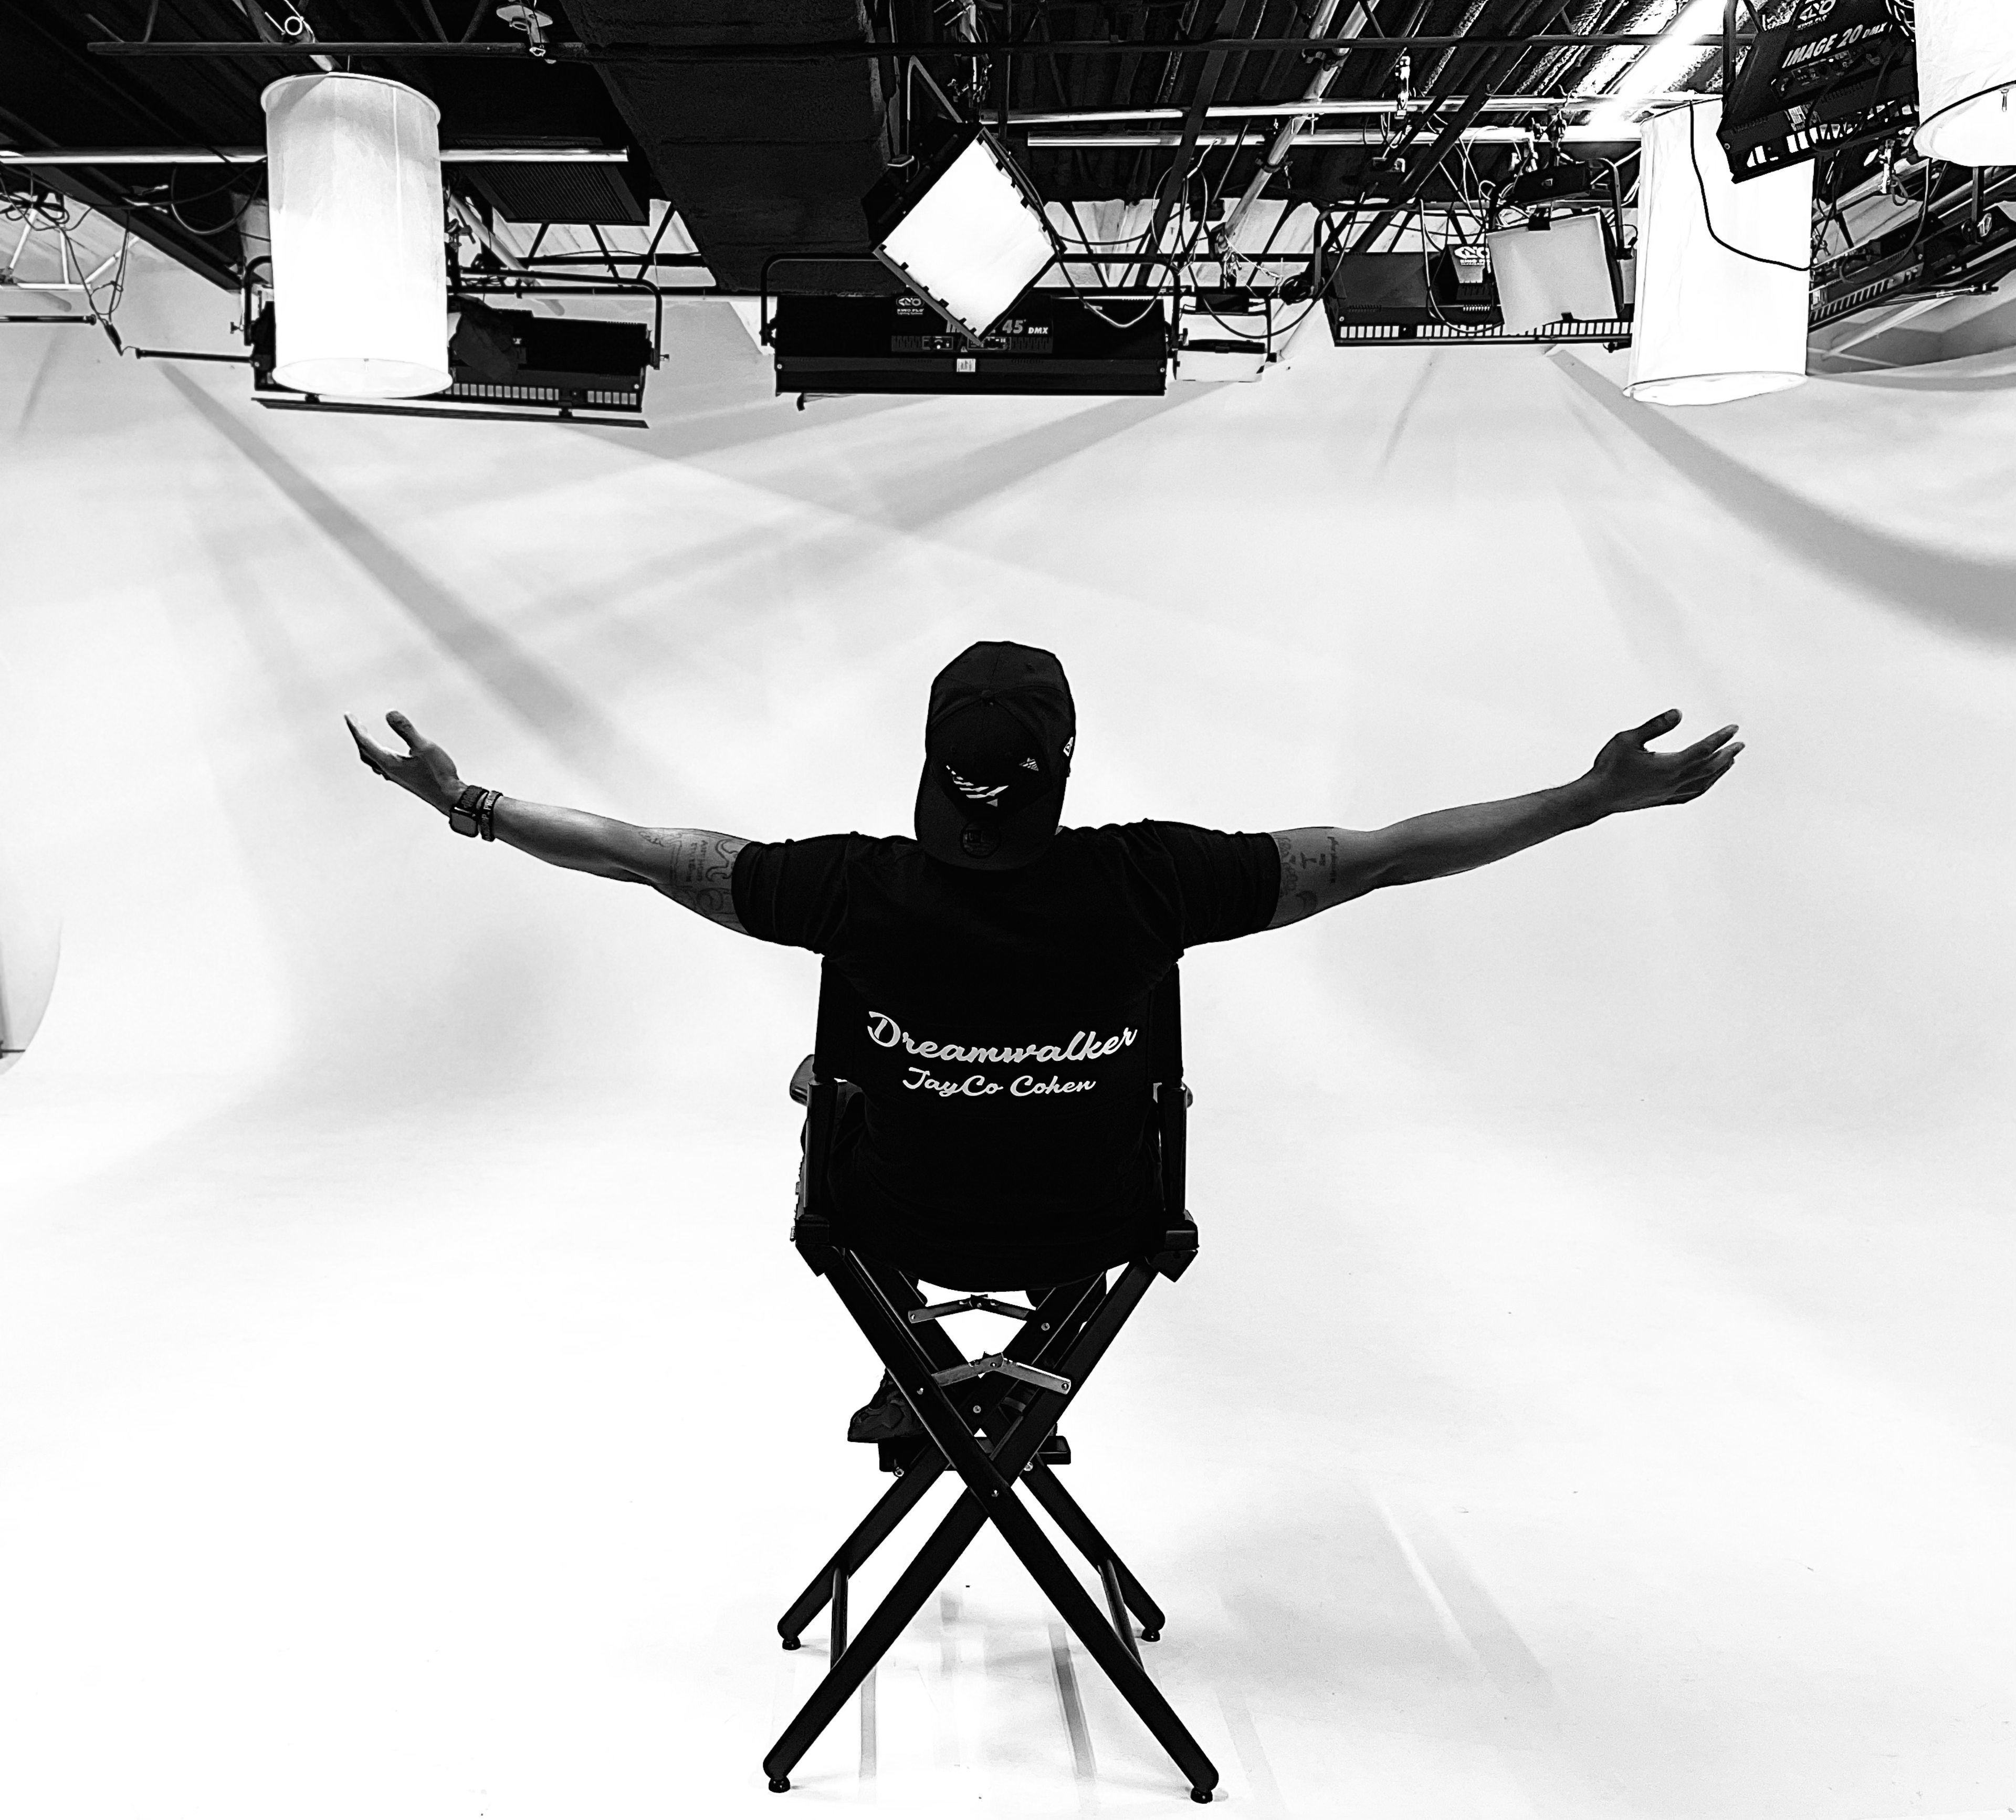 A man posing for a black and white photoshoot with his arms outstretched in a chair.